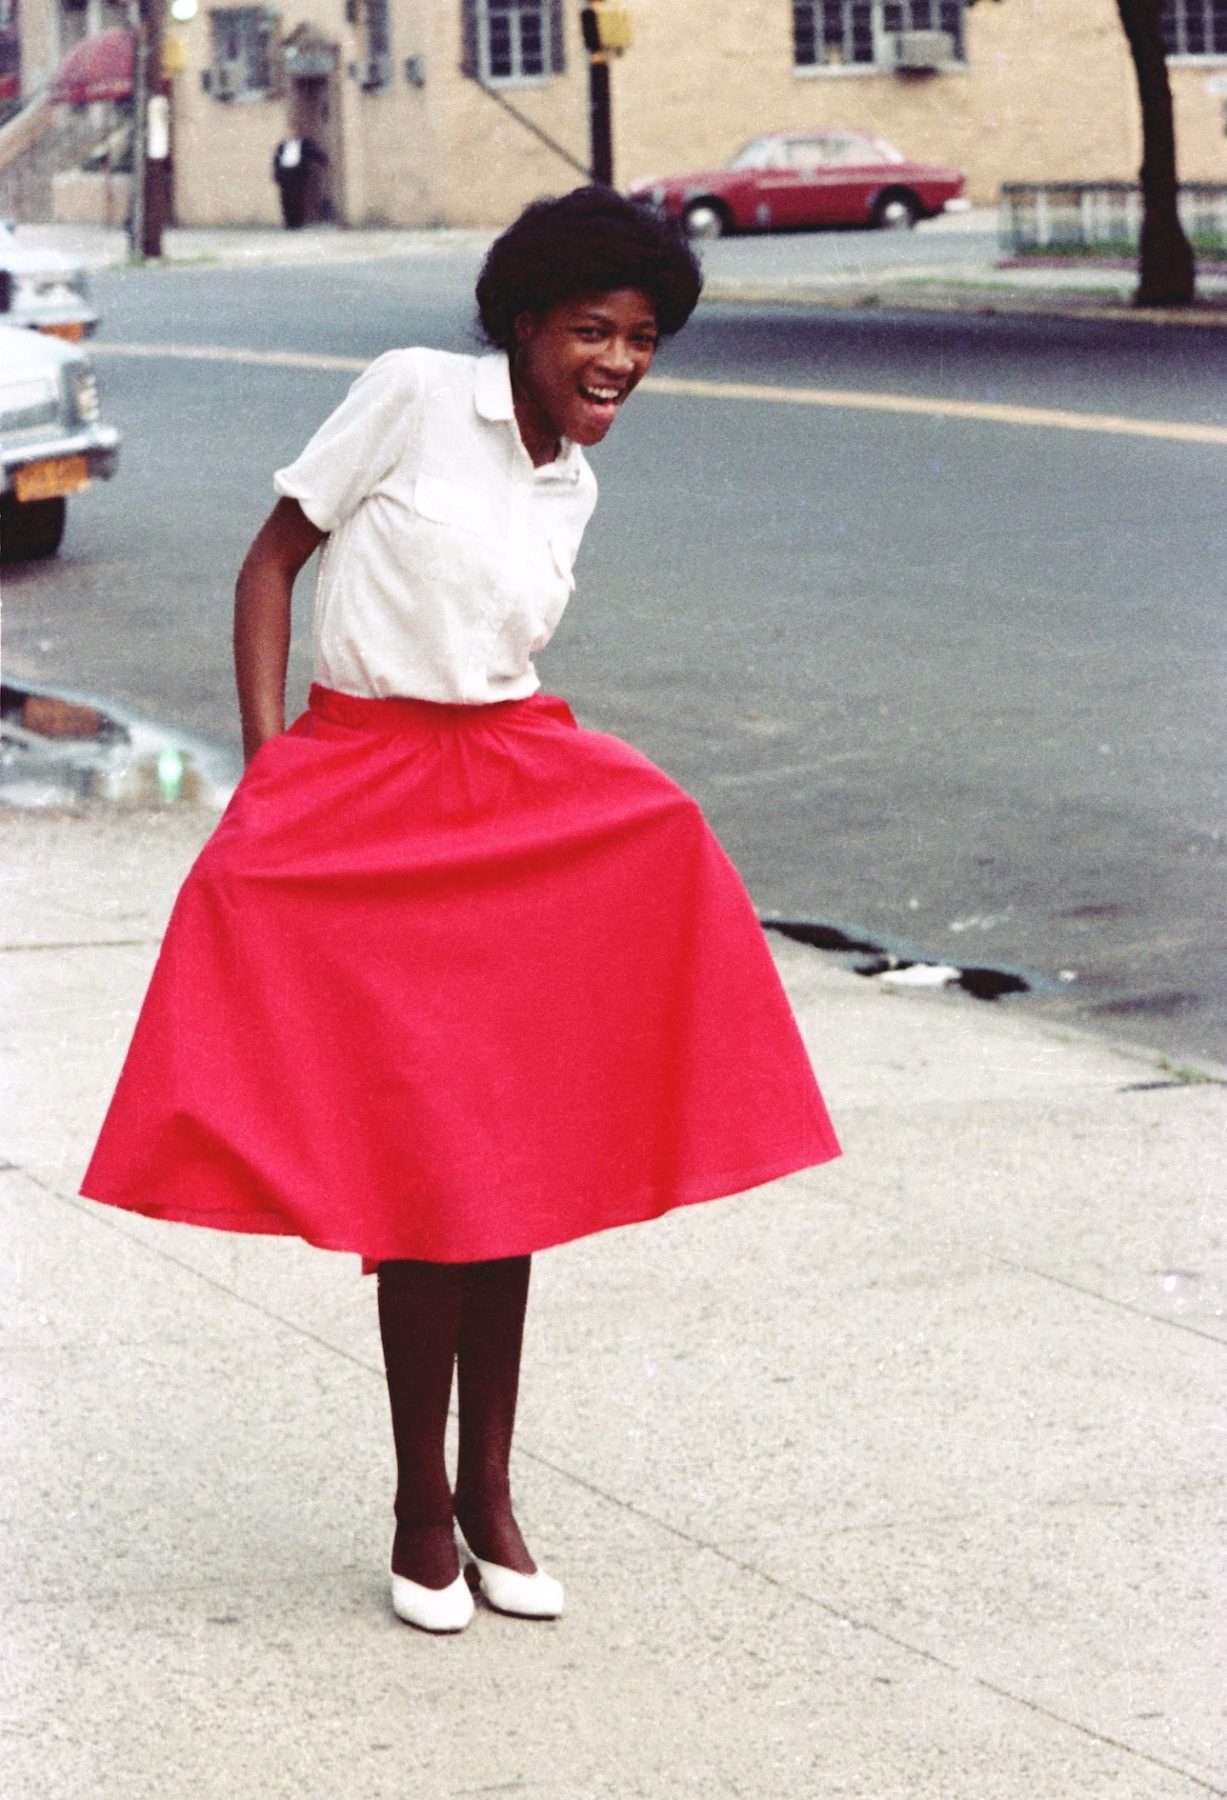 Street Photography Exhibition Qatar Brooklyn Jamel Shabazz 1980 Fly Girl Vintage, Exhibition at The Gallery at VCUarts Qatar